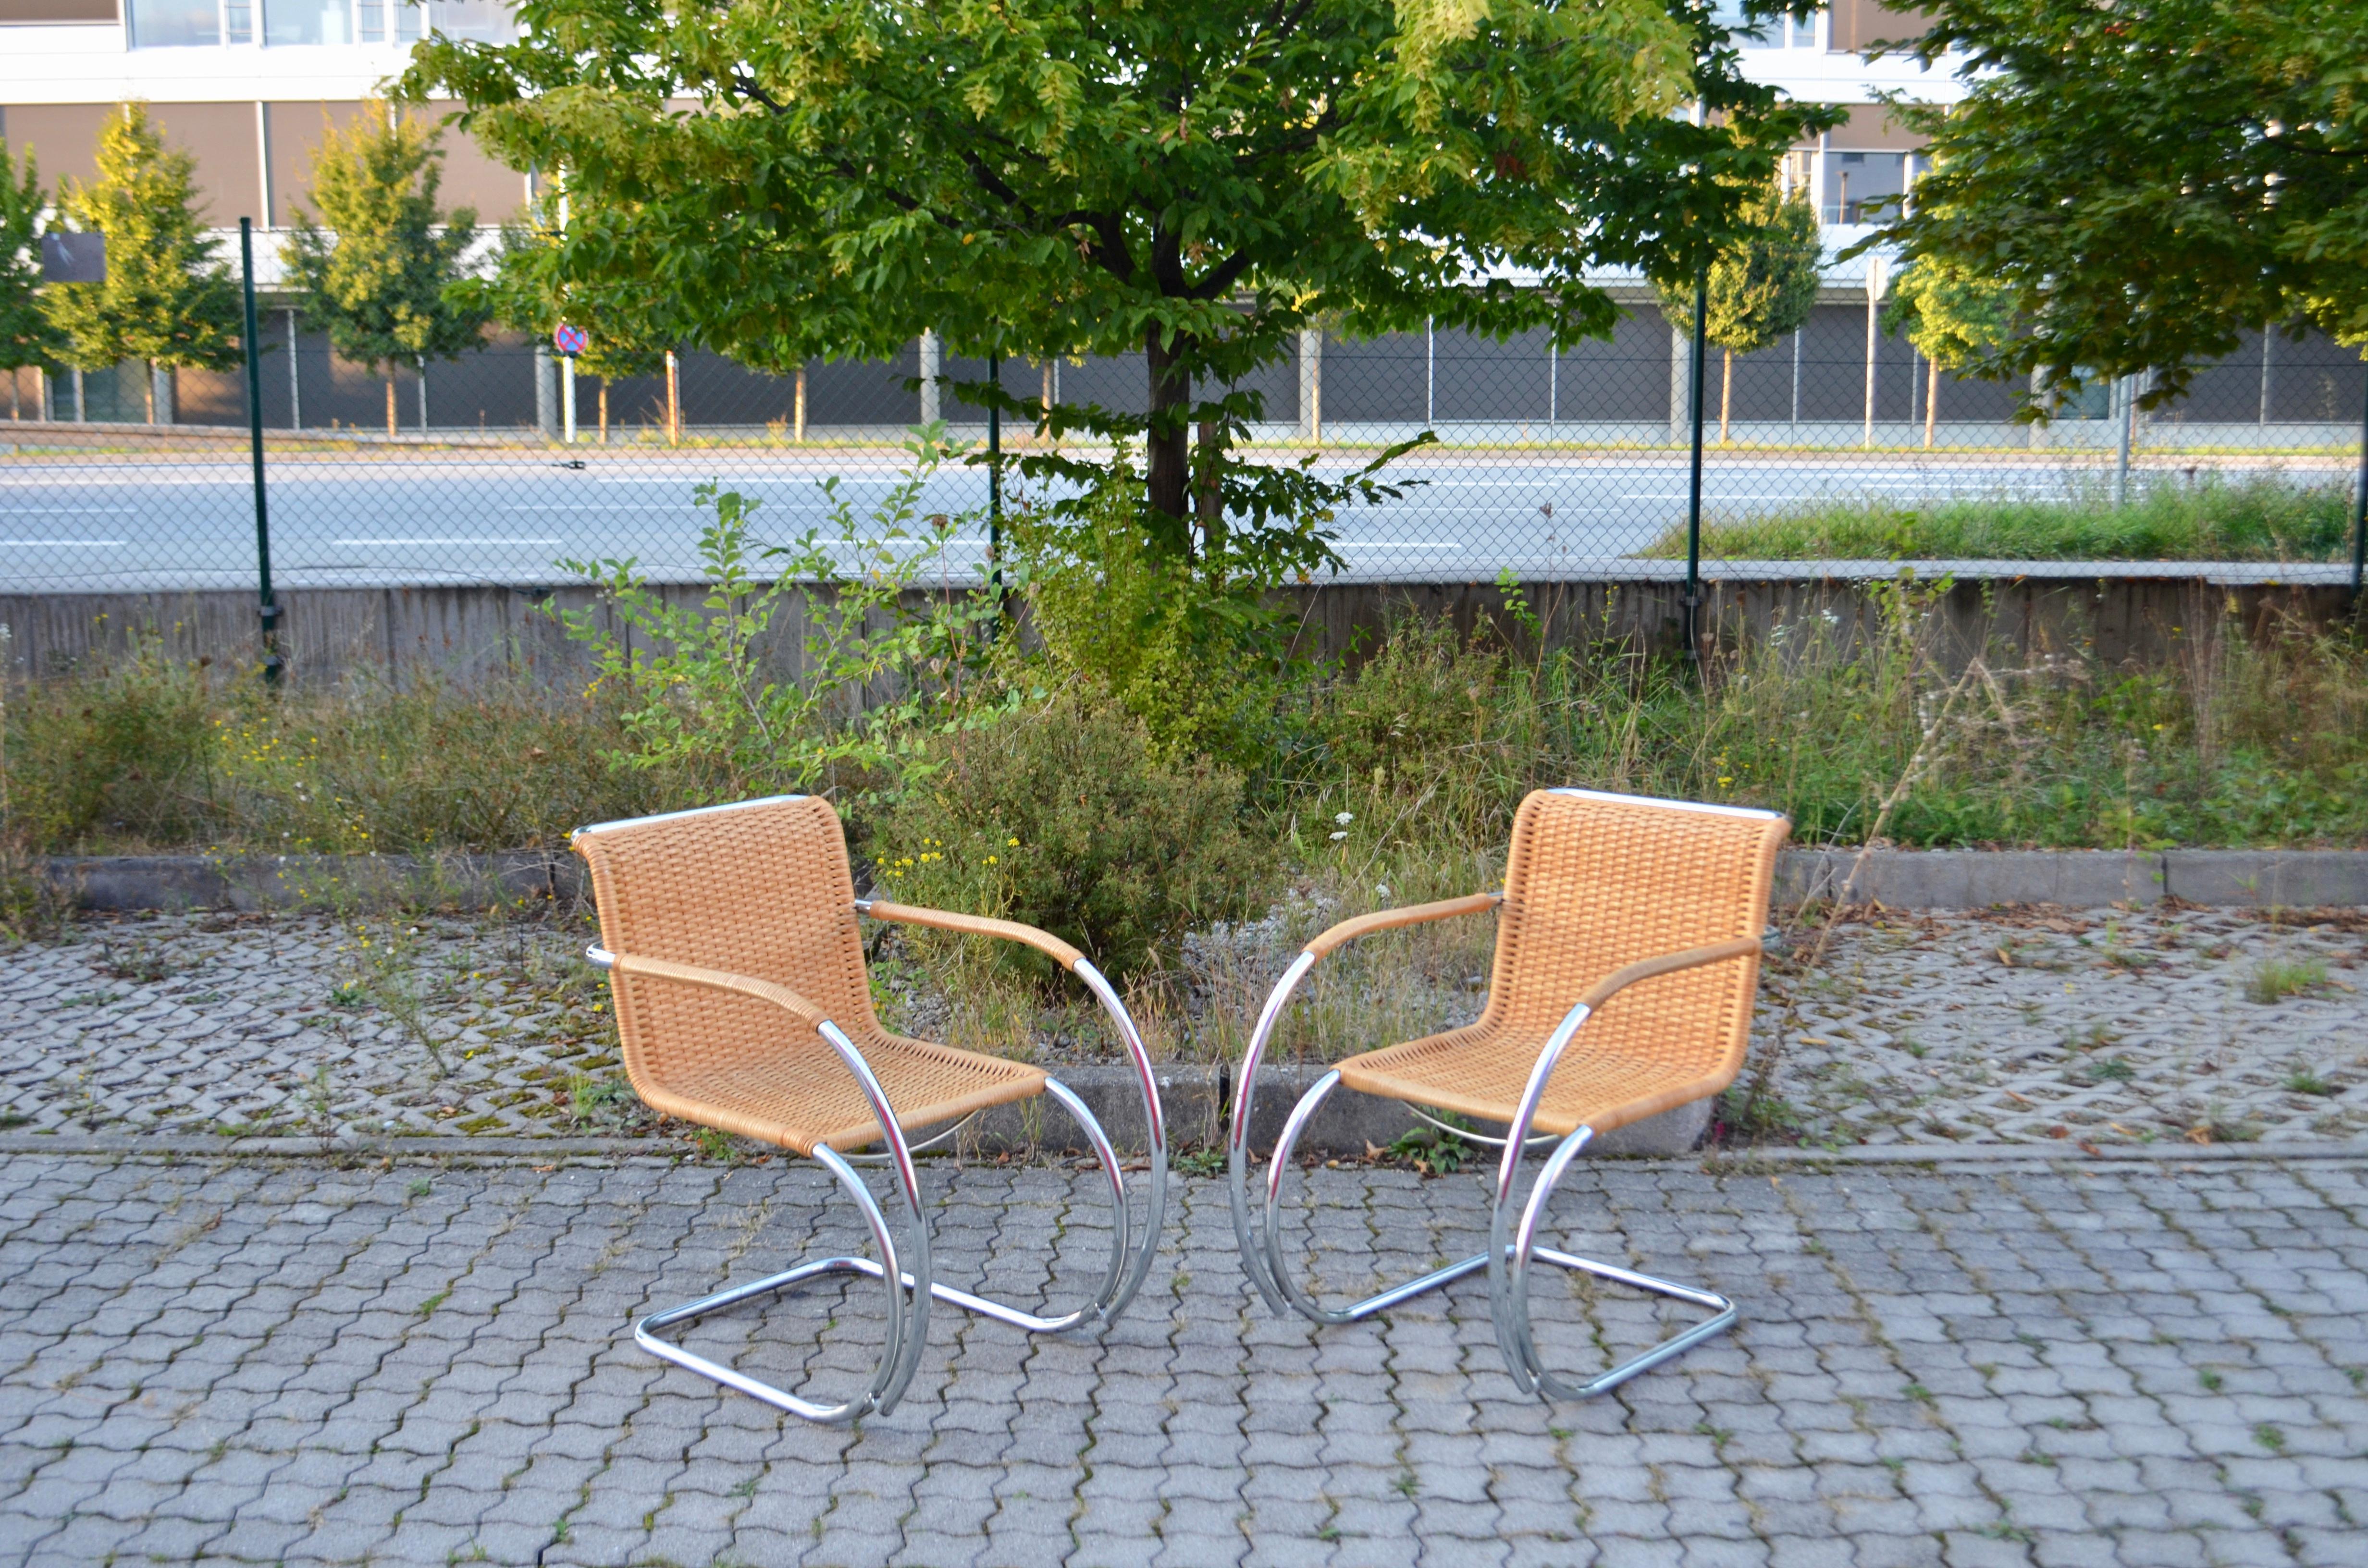 These Cantilever vintage armchairs are Bauhaus classics and were designed by Mies van der Rohe and knowned by the name Weißenhof Chair.This pair were produced by Thonet with the Model name S533 RF.
3 license holders are producing this chair today.